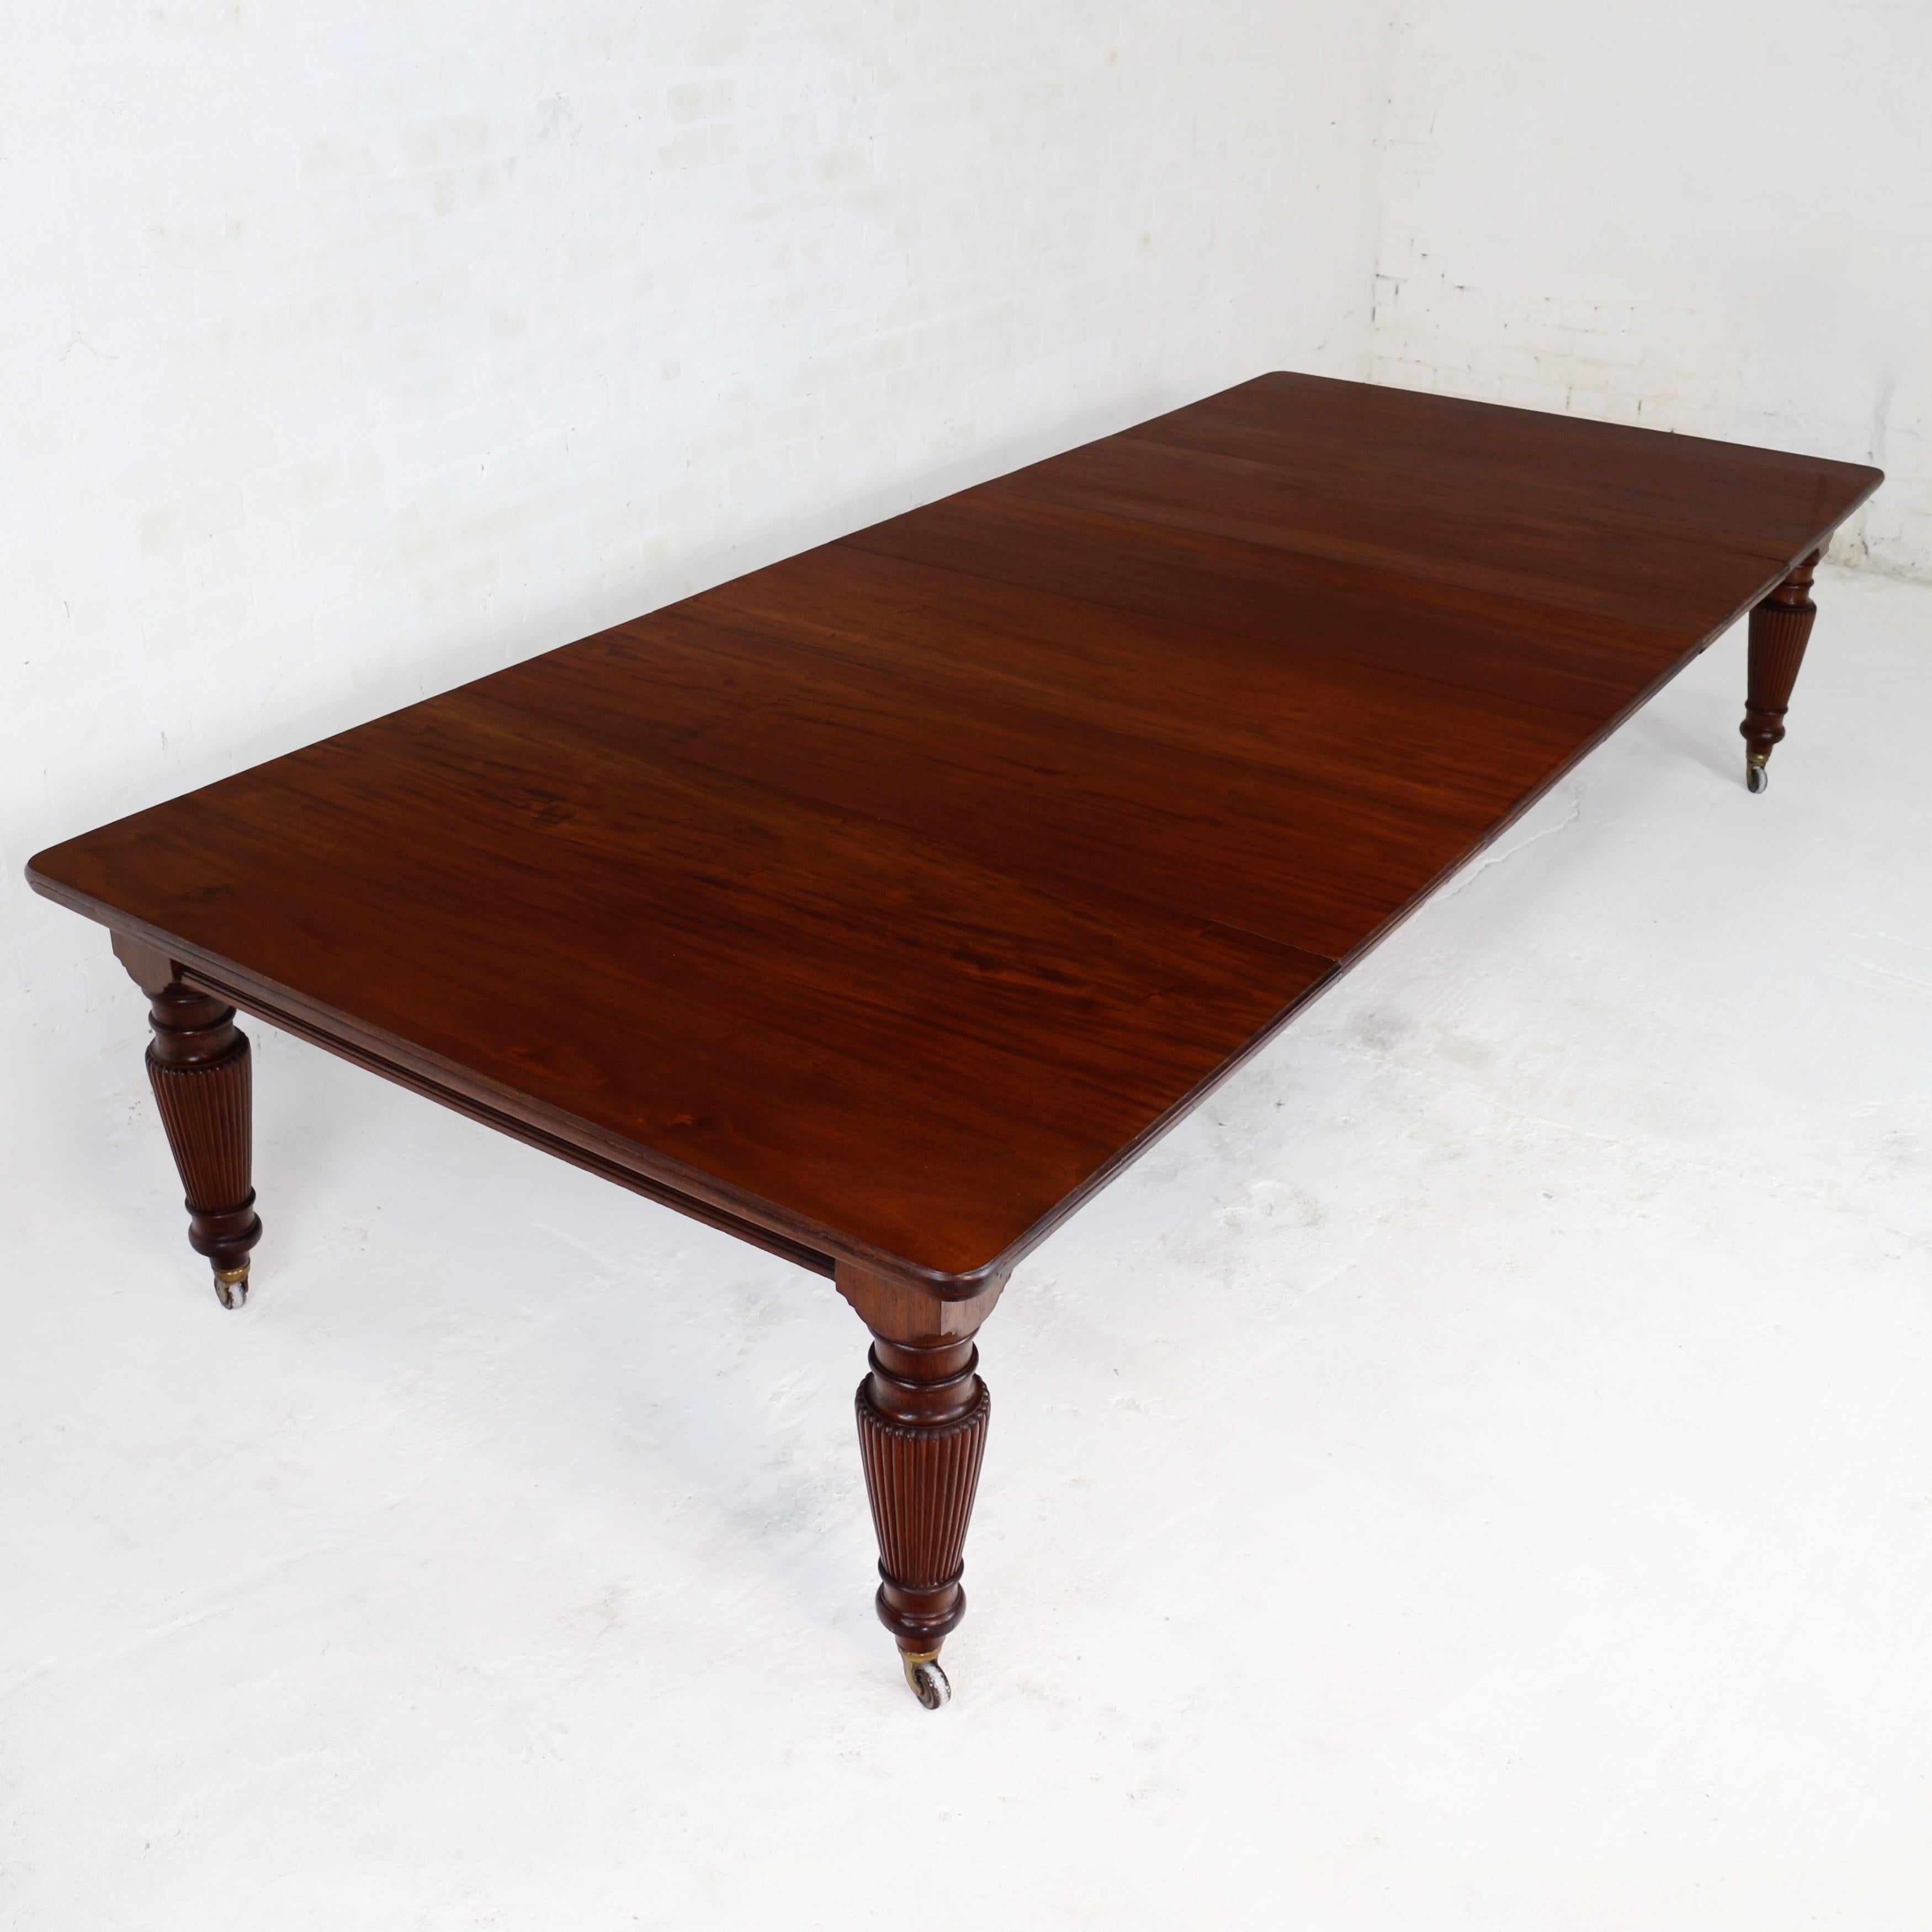 Hand-Crafted Antique English Victorian Mahogany Extending Dining Table & 4 Leaves